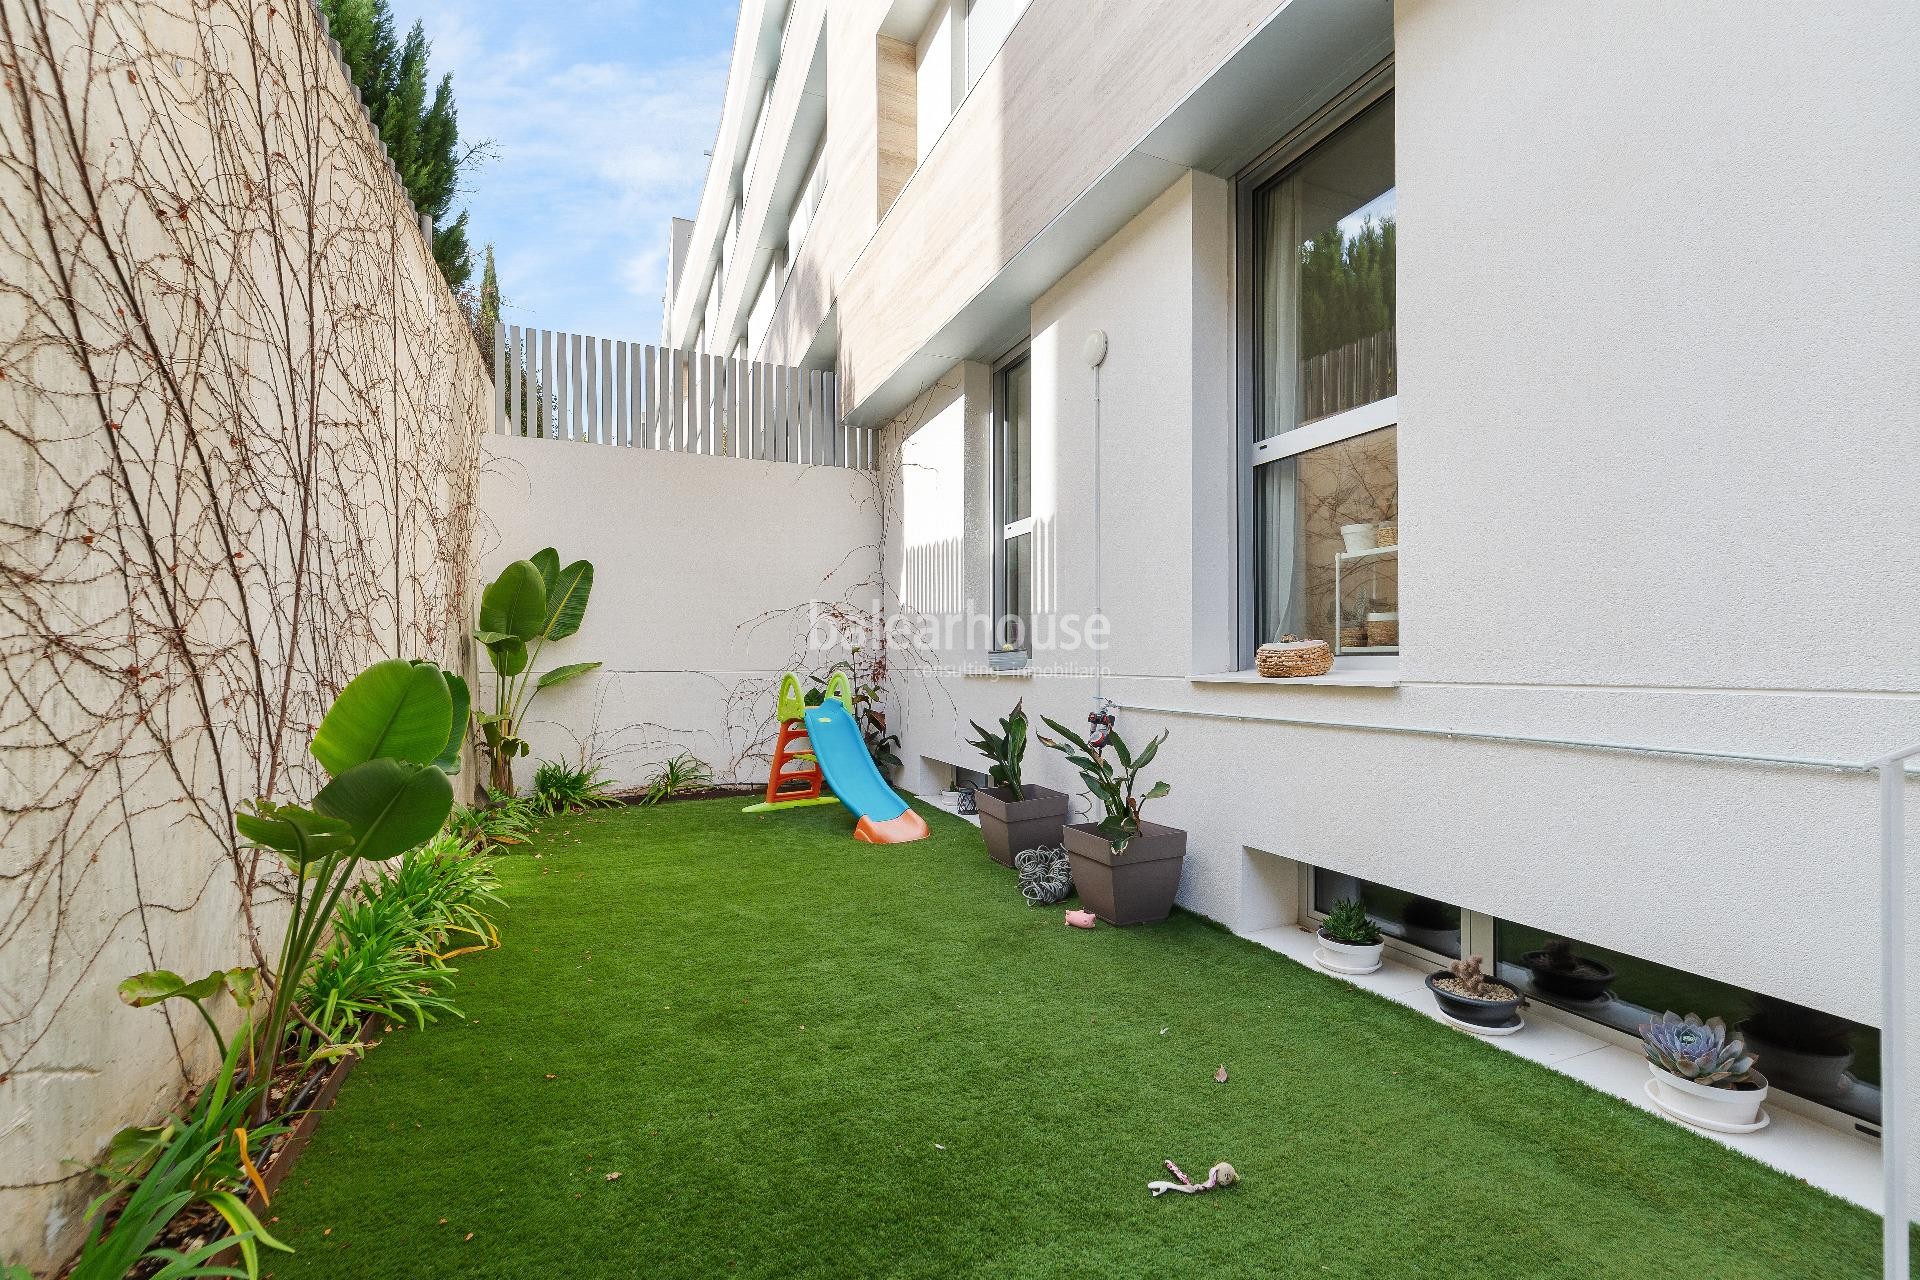 Luxurious ground floor duplex with terrace and garden in exclusive residential complex in Son Quint.